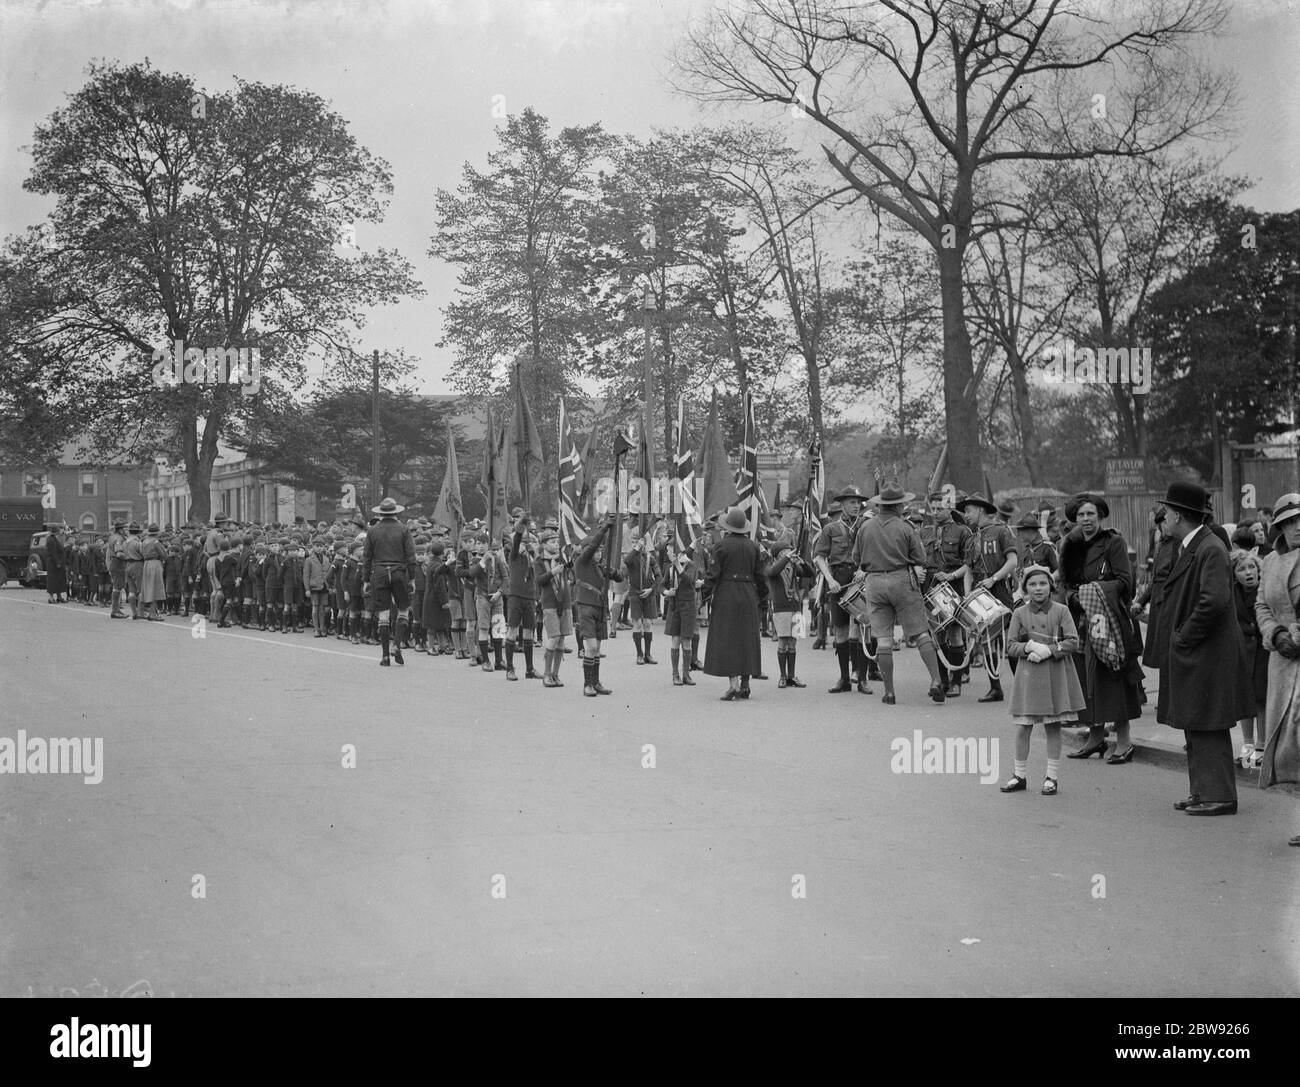 St George ' s day scout parade in Dartford , Kent . The procession lining up . 1938 Stock Photo